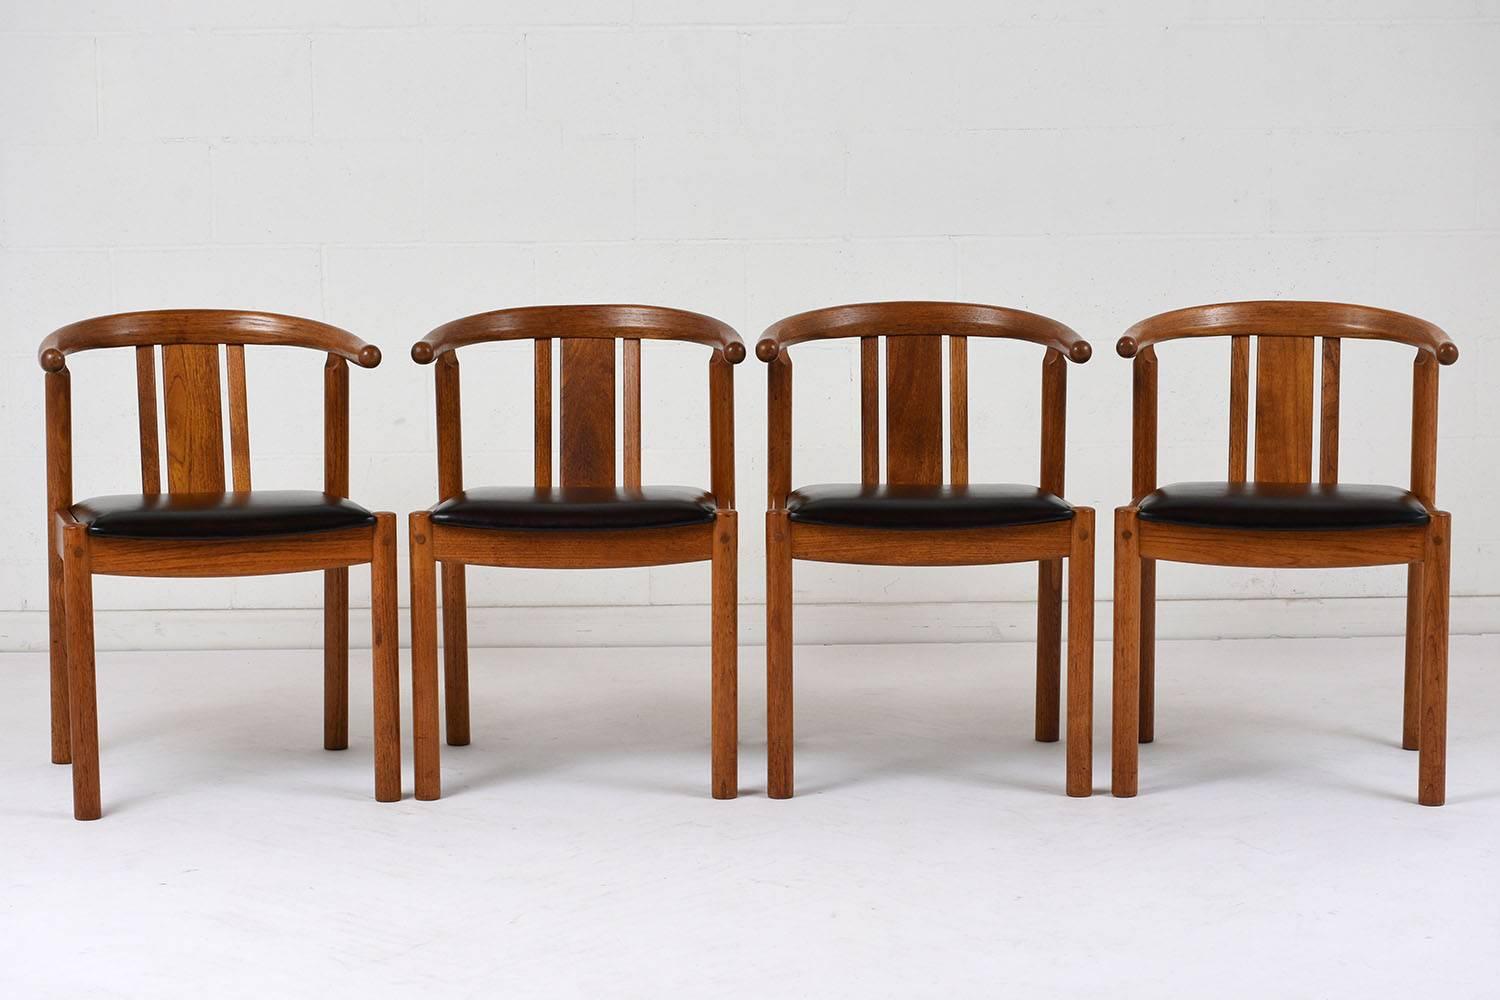 This Set of Four 1940s Danish Mid-Century Modern Style Dining Chairs feature sturdy teak wood frames stained in a walnut color with a newly lacquered finish. The frames have horseshoe back with a straight splat design, comfortable seats that have